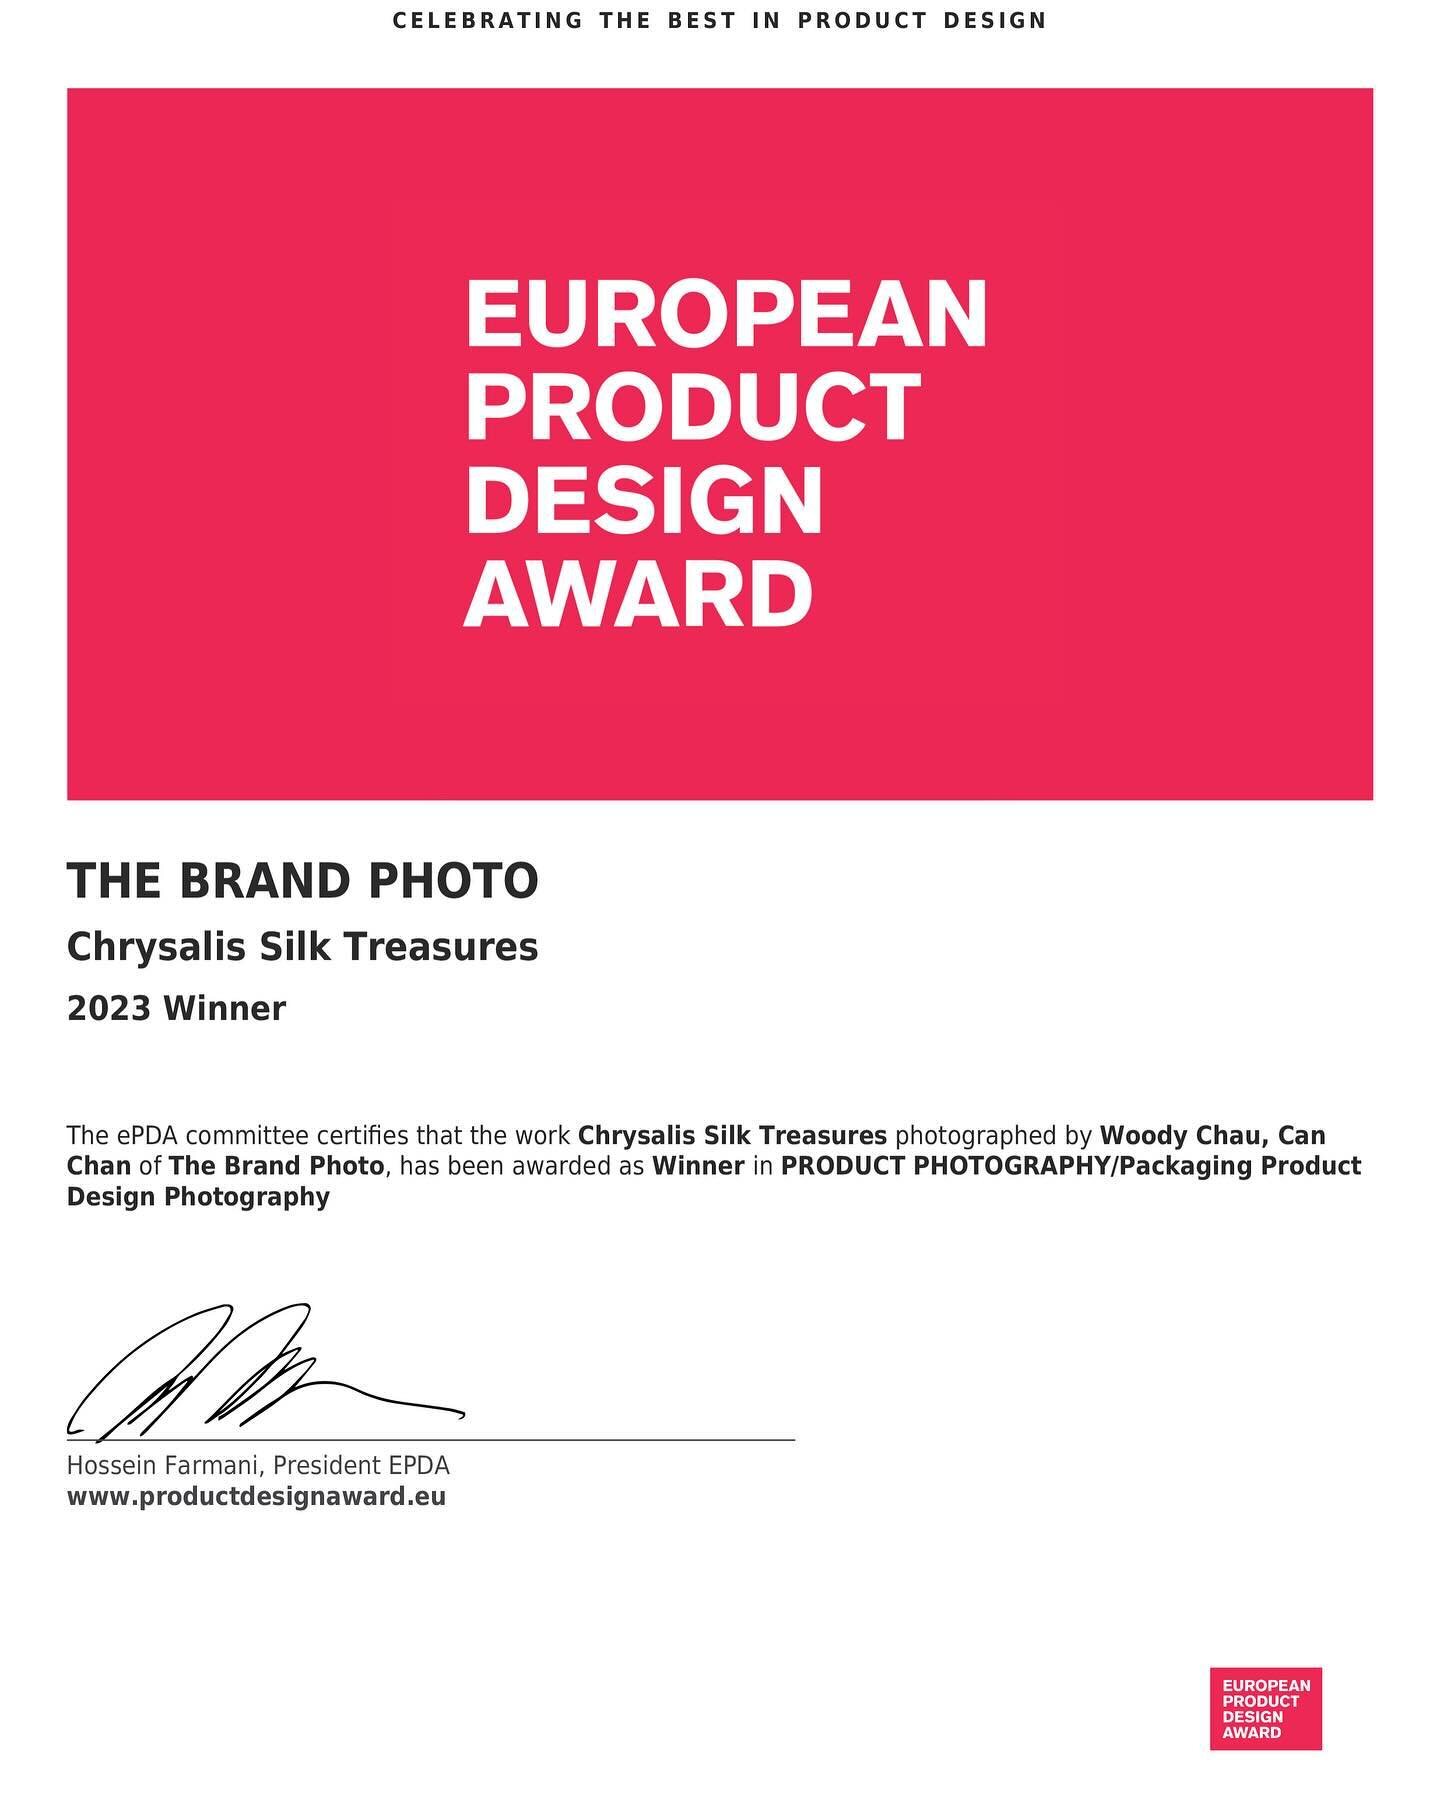 After Chinese New Year, I received some exciting news from the @europeanproductdesignaward (ePDA).

I&rsquo;m honoured to announce that the series &lsquo;Chrysalis Silk Treasures,&rsquo; photographed by me, has been awarded as the Winner in PRODUCT P